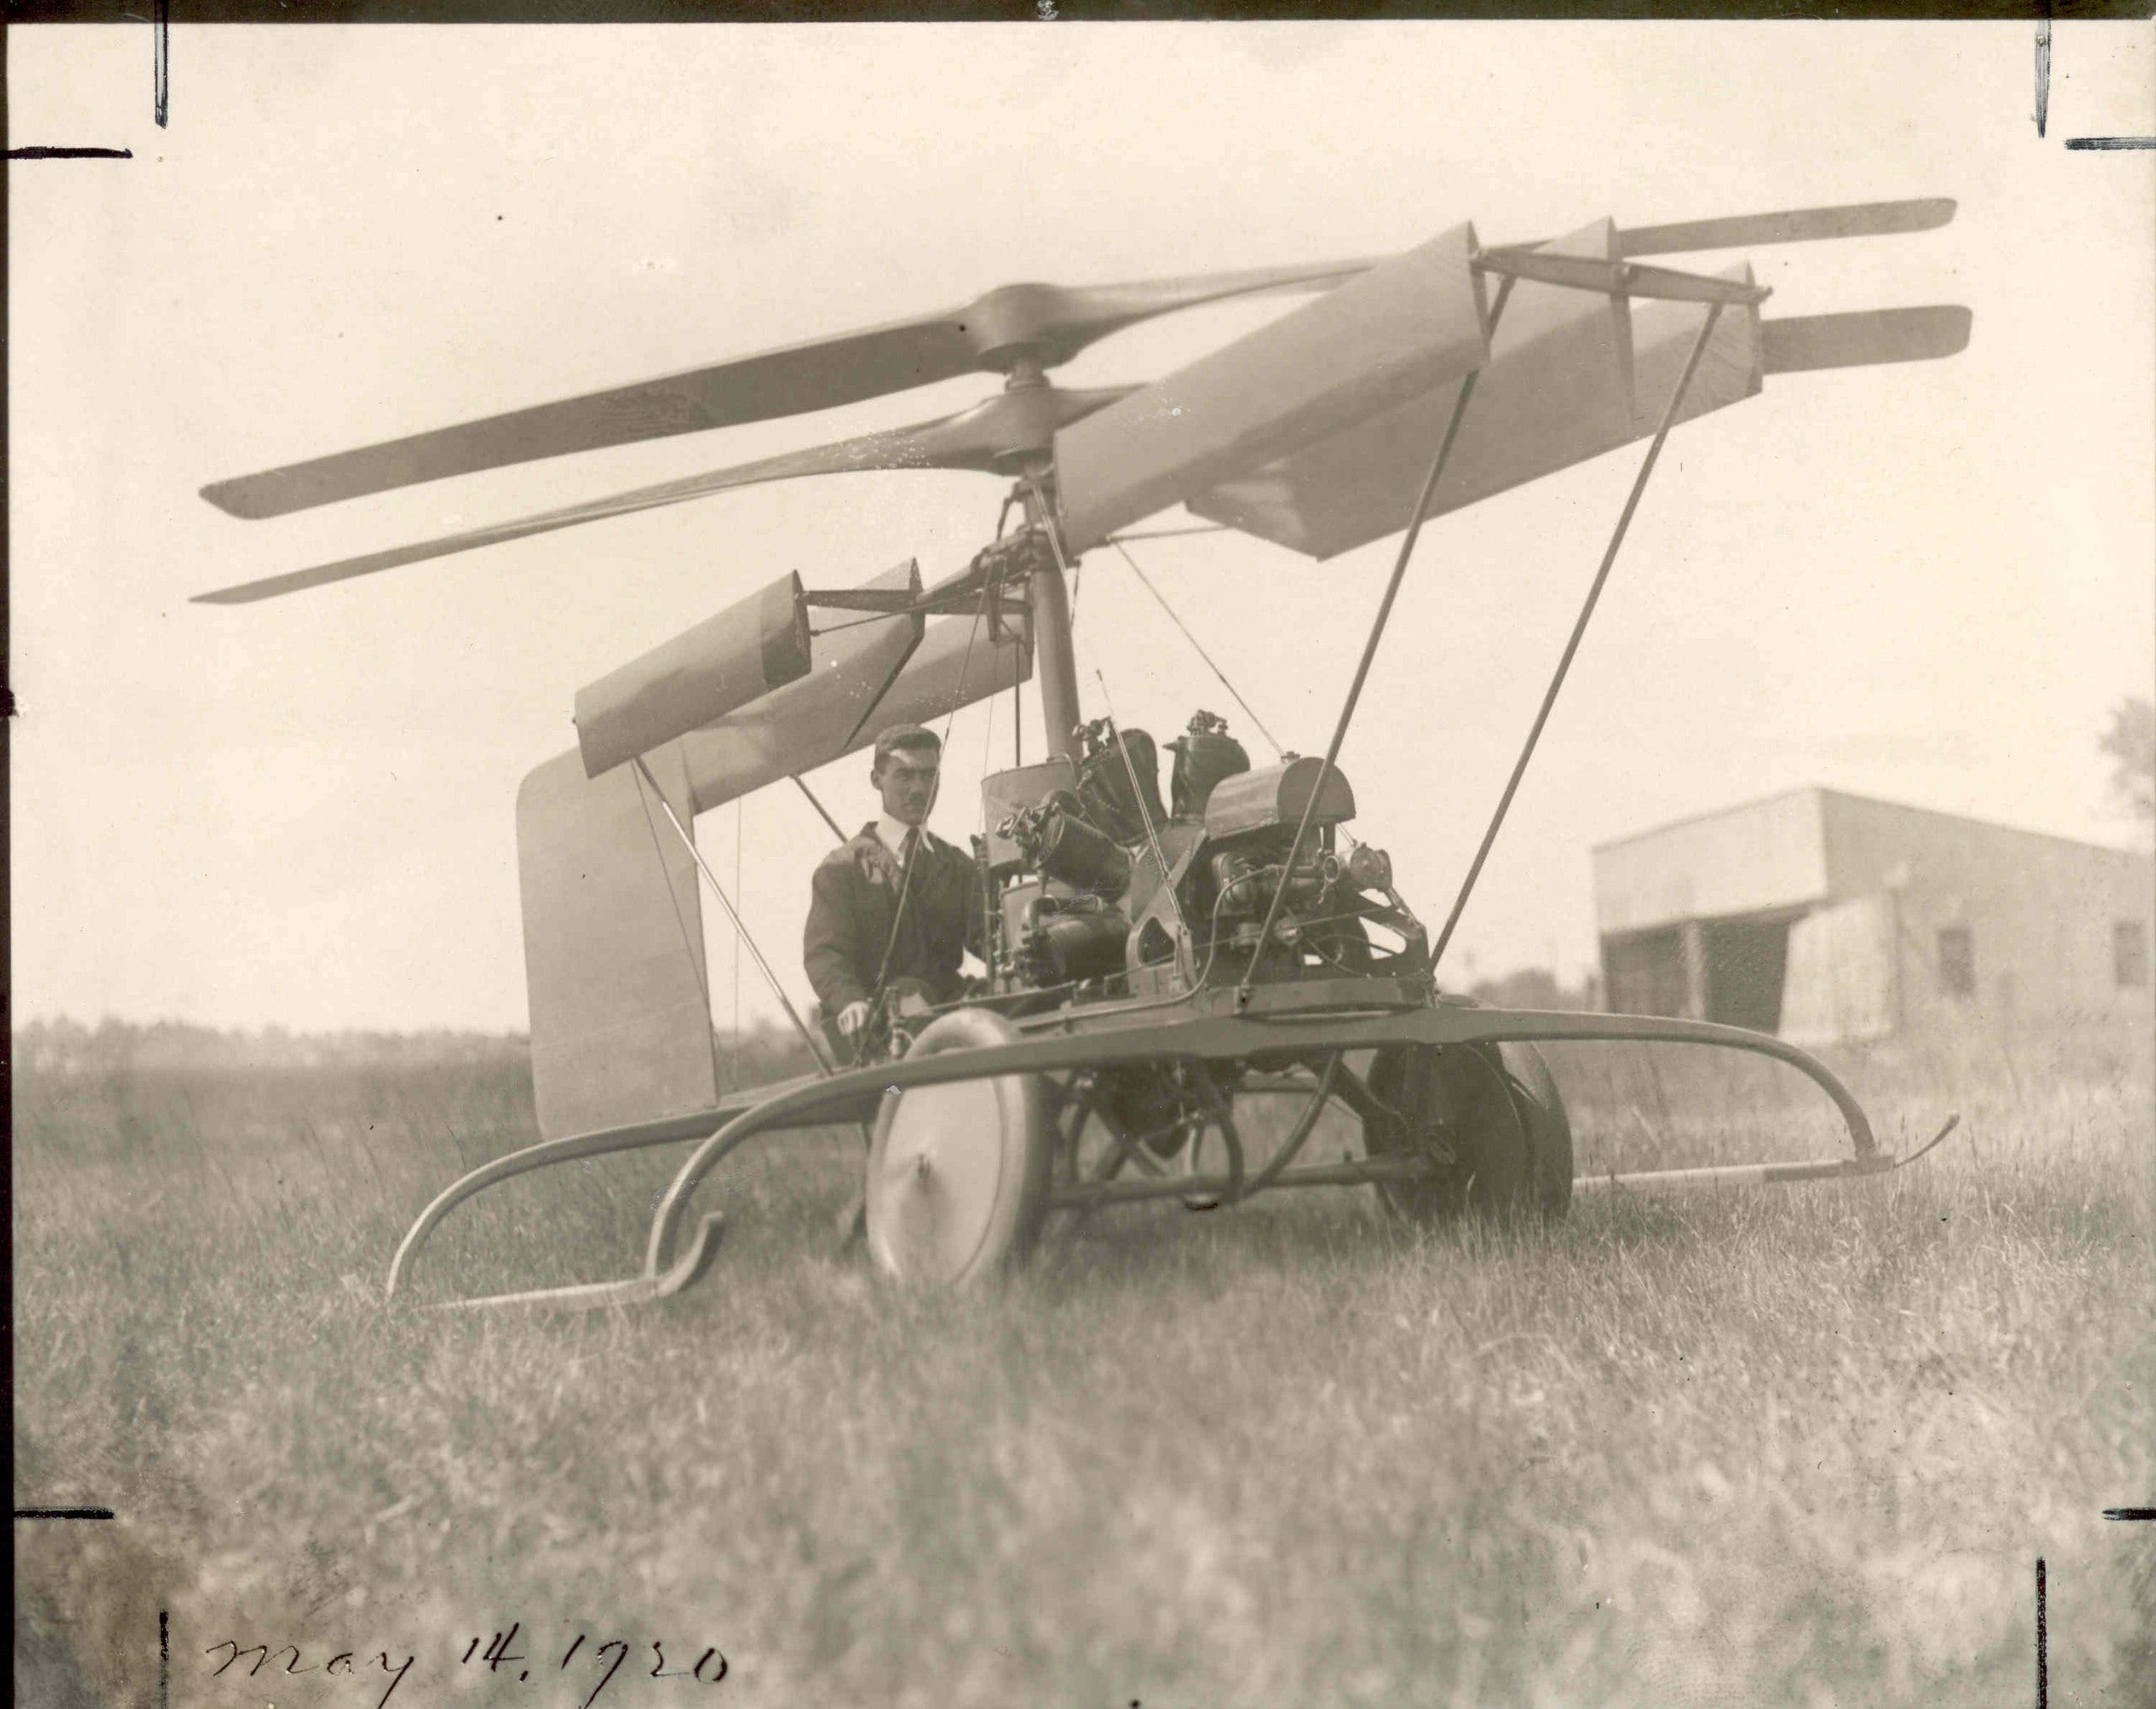 The father-son duo who built experimental helicopters